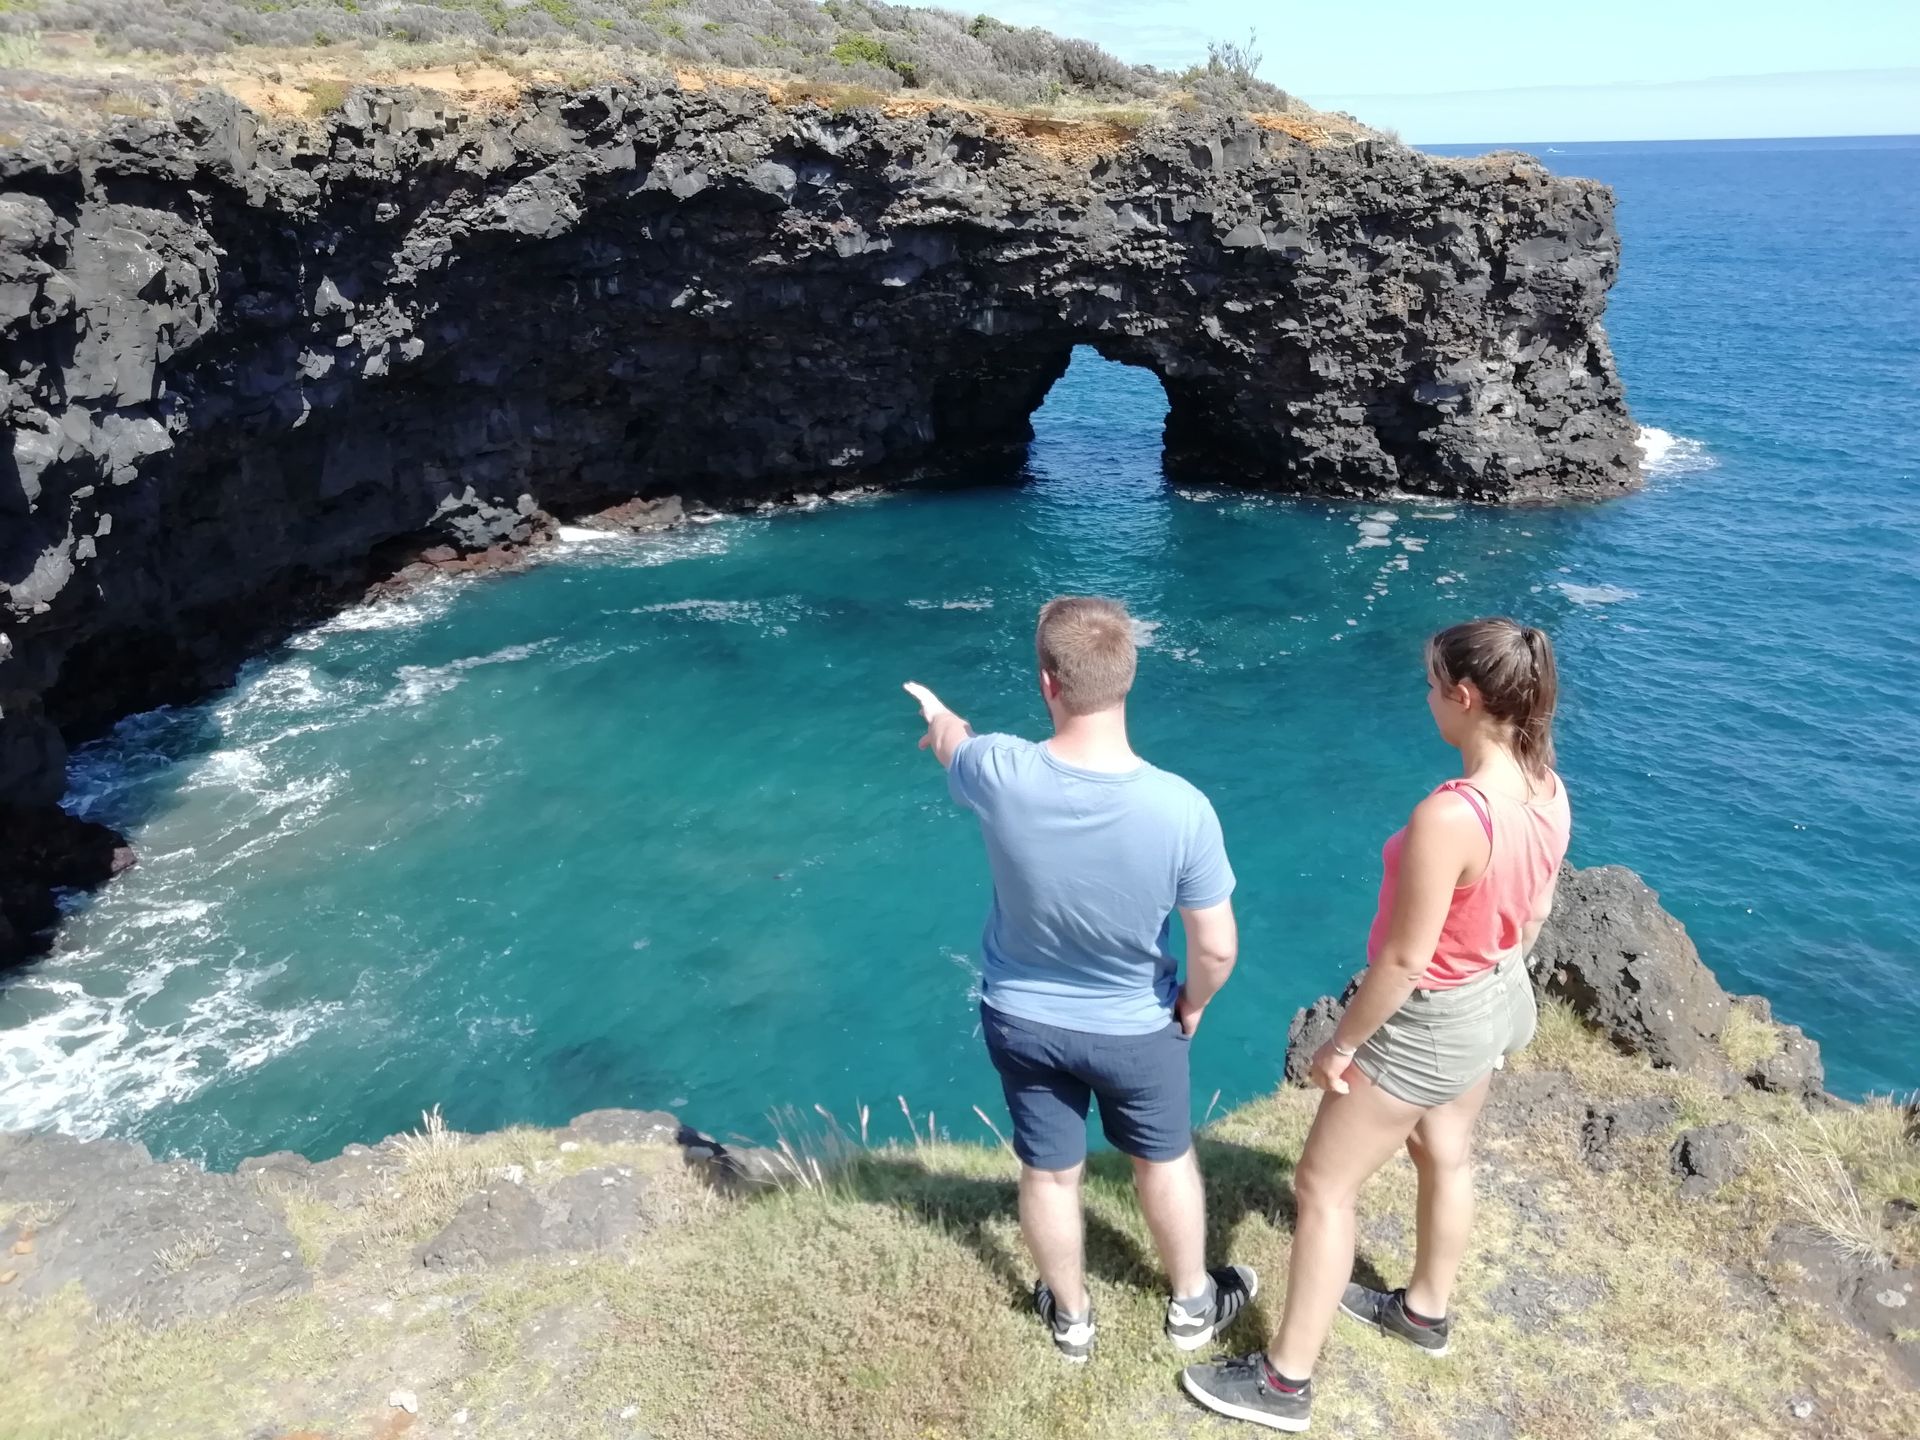 Visit the Ponta Furada Viewpoint on our full-day Excursions, Tours and Guided Visits on the island of Faial Azores.